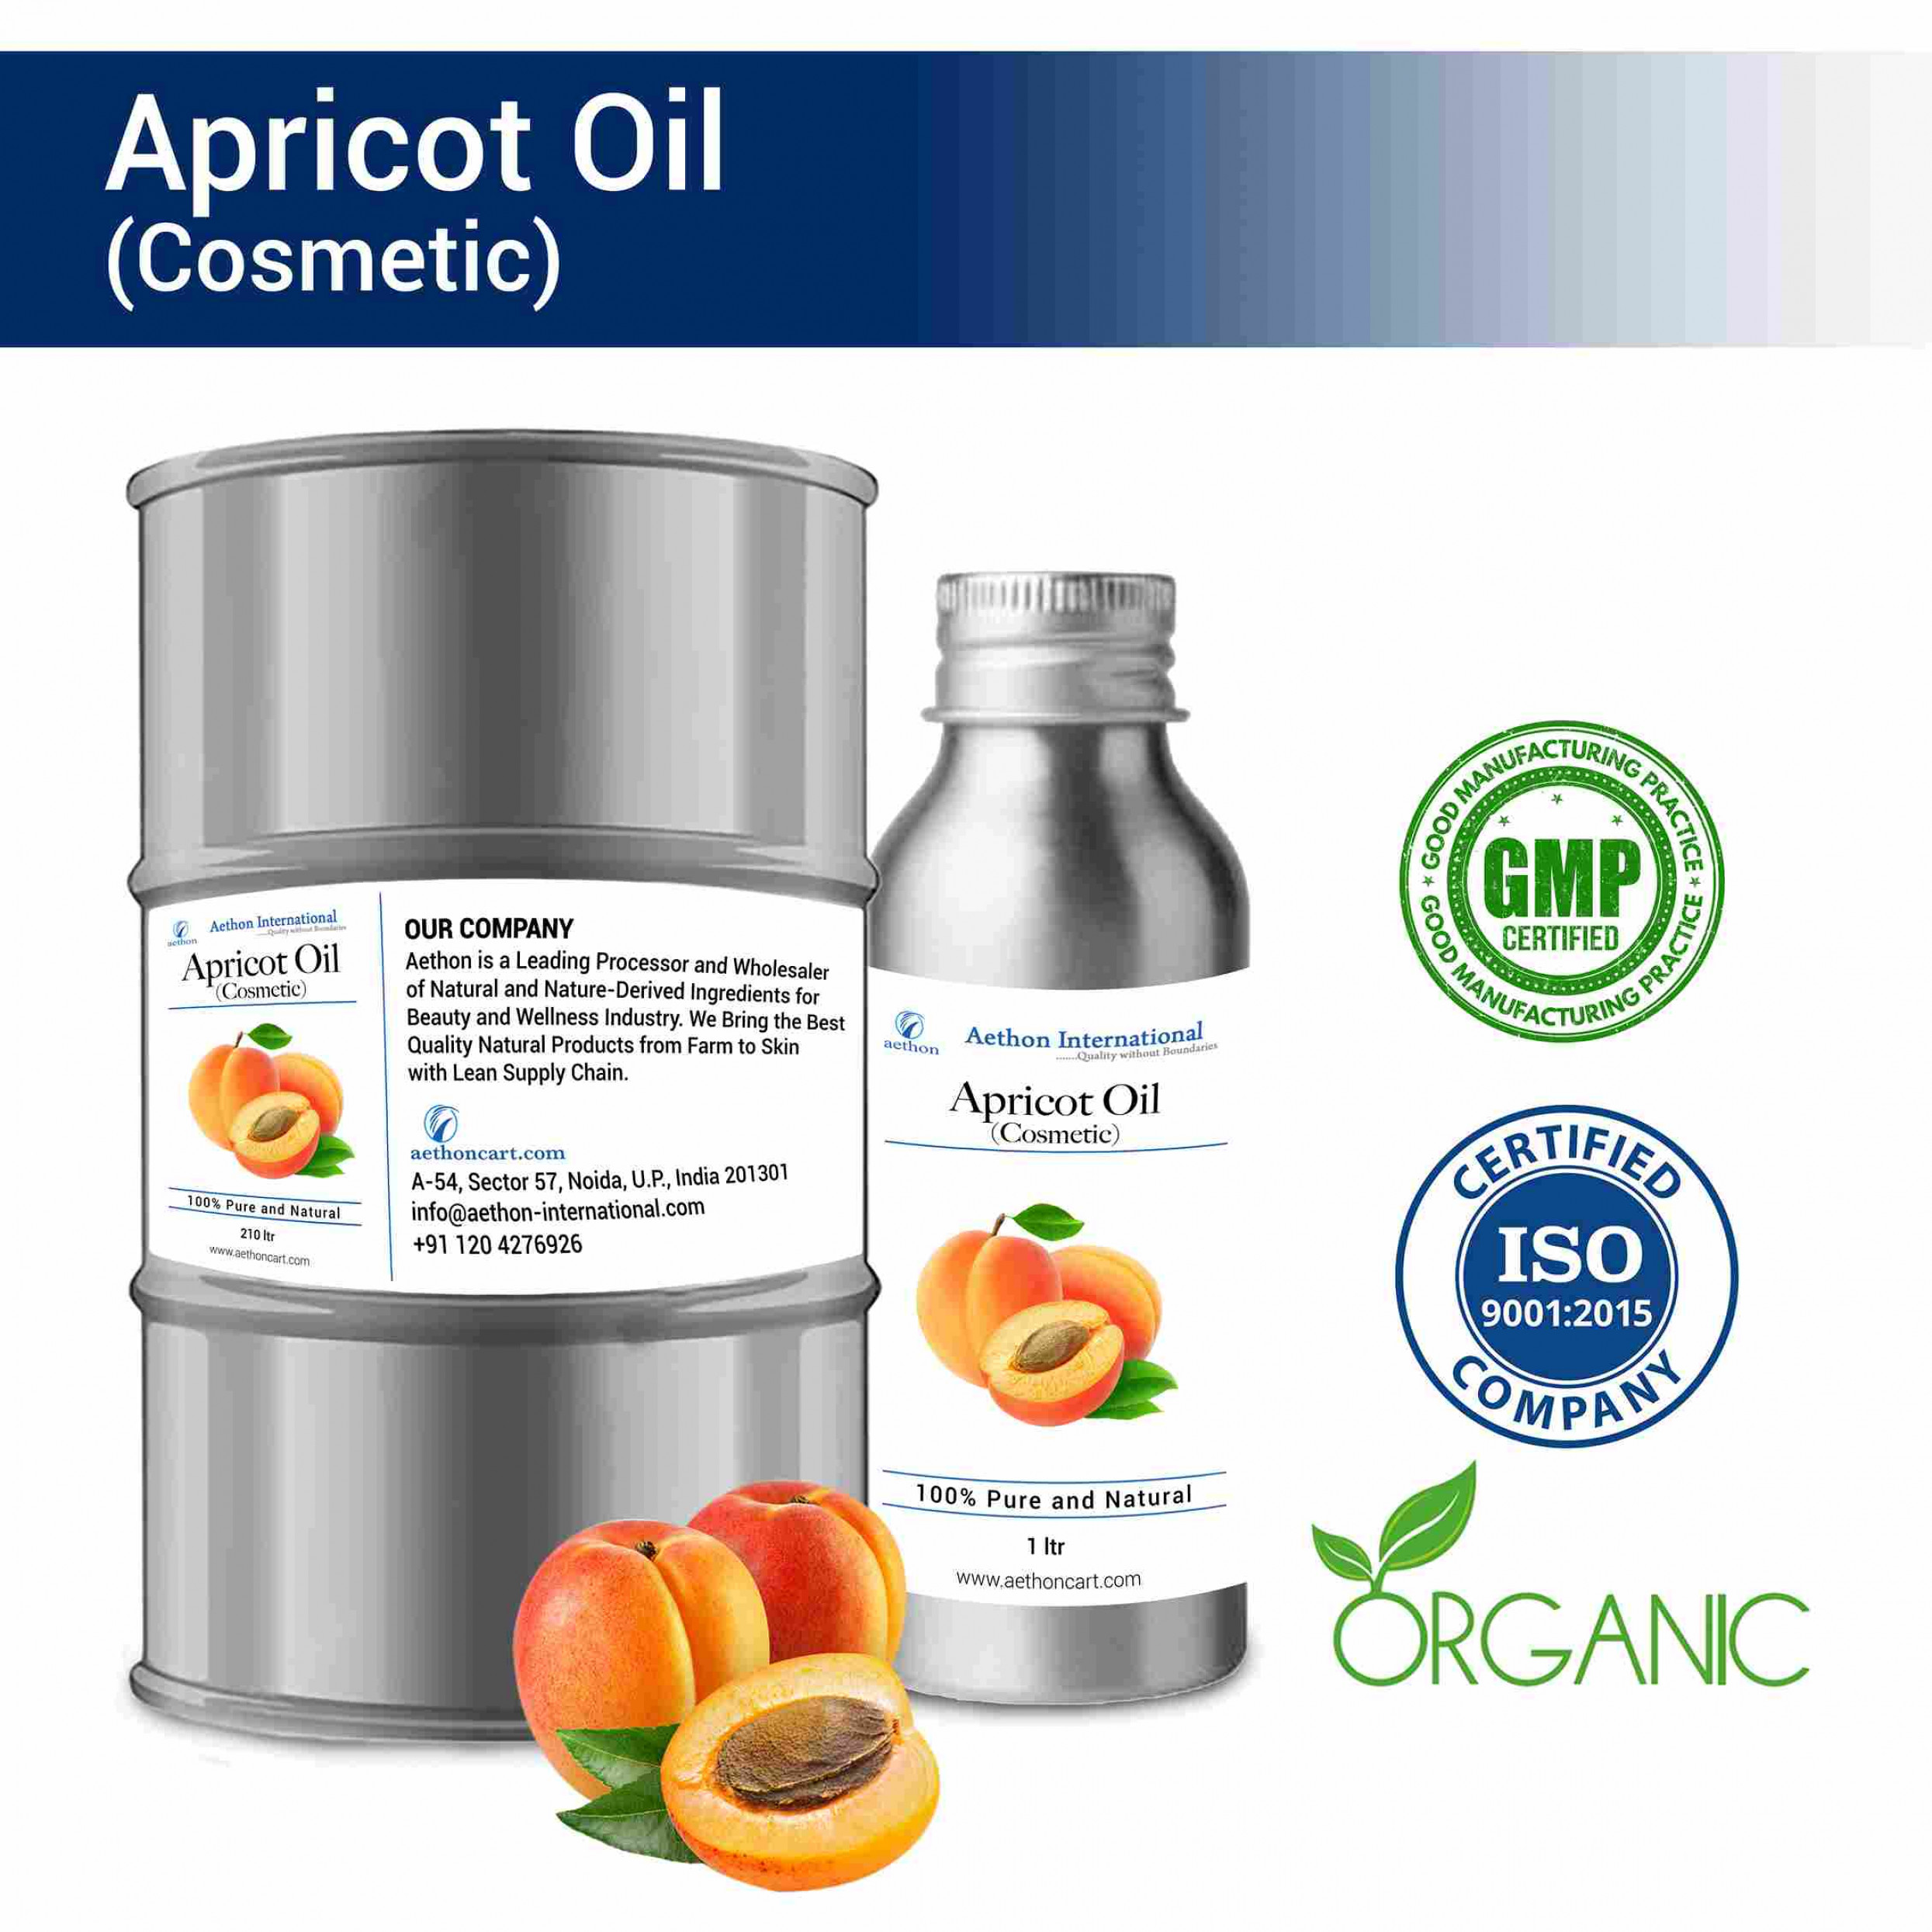 Apricot Oil (Cosmetic)